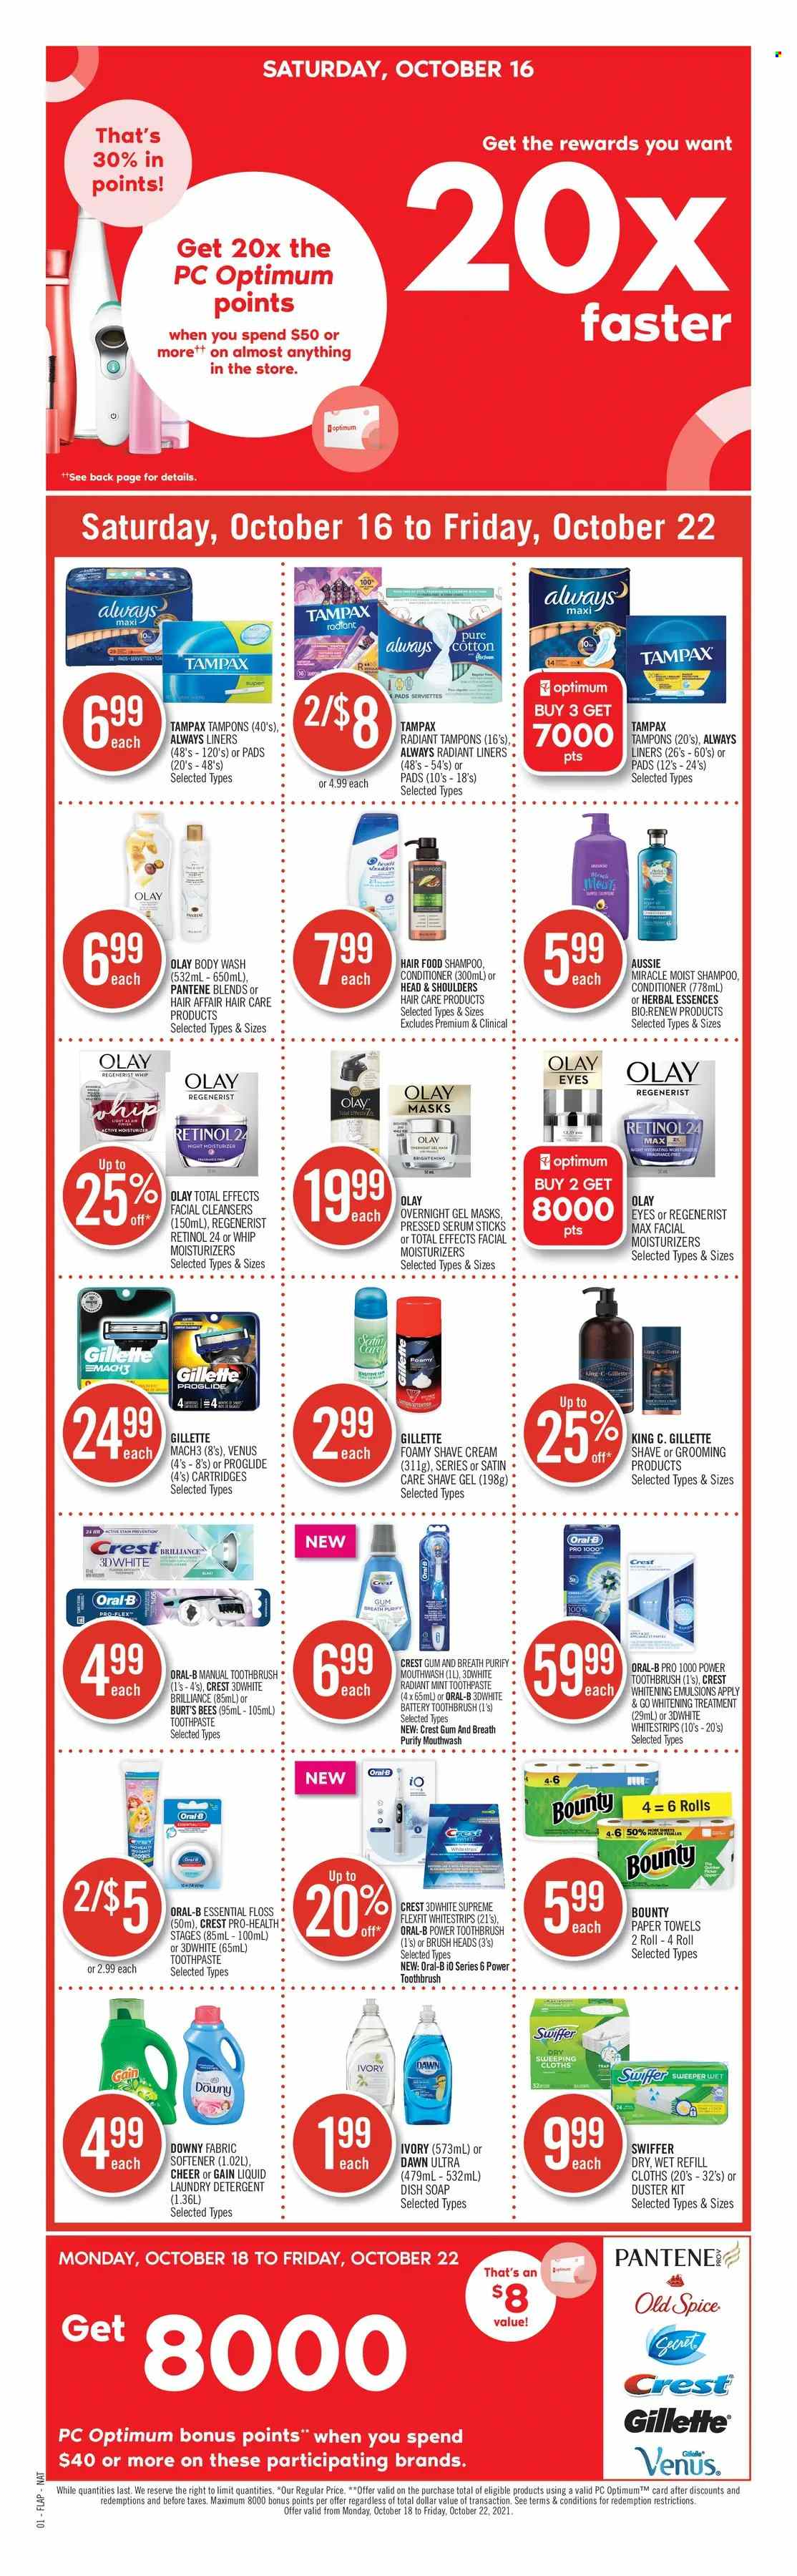 thumbnail - Shoppers Drug Mart Flyer - October 16, 2021 - October 22, 2021 - Sales products - Bounty, spice, Always liners, kitchen towels, paper towels, Gain, Swiffer, fabric softener, laundry detergent, Downy Laundry, body wash, soap, toothbrush, toothpaste, mouthwash, Crest, tampons, moisturizer, serum, Olay, Aussie, conditioner, Herbal Essences, shave gel, Venus, shave cream, detergent, Gillette, Tampax, Head & Shoulders, Pantene, Old Spice, Oral-B. Page 19.